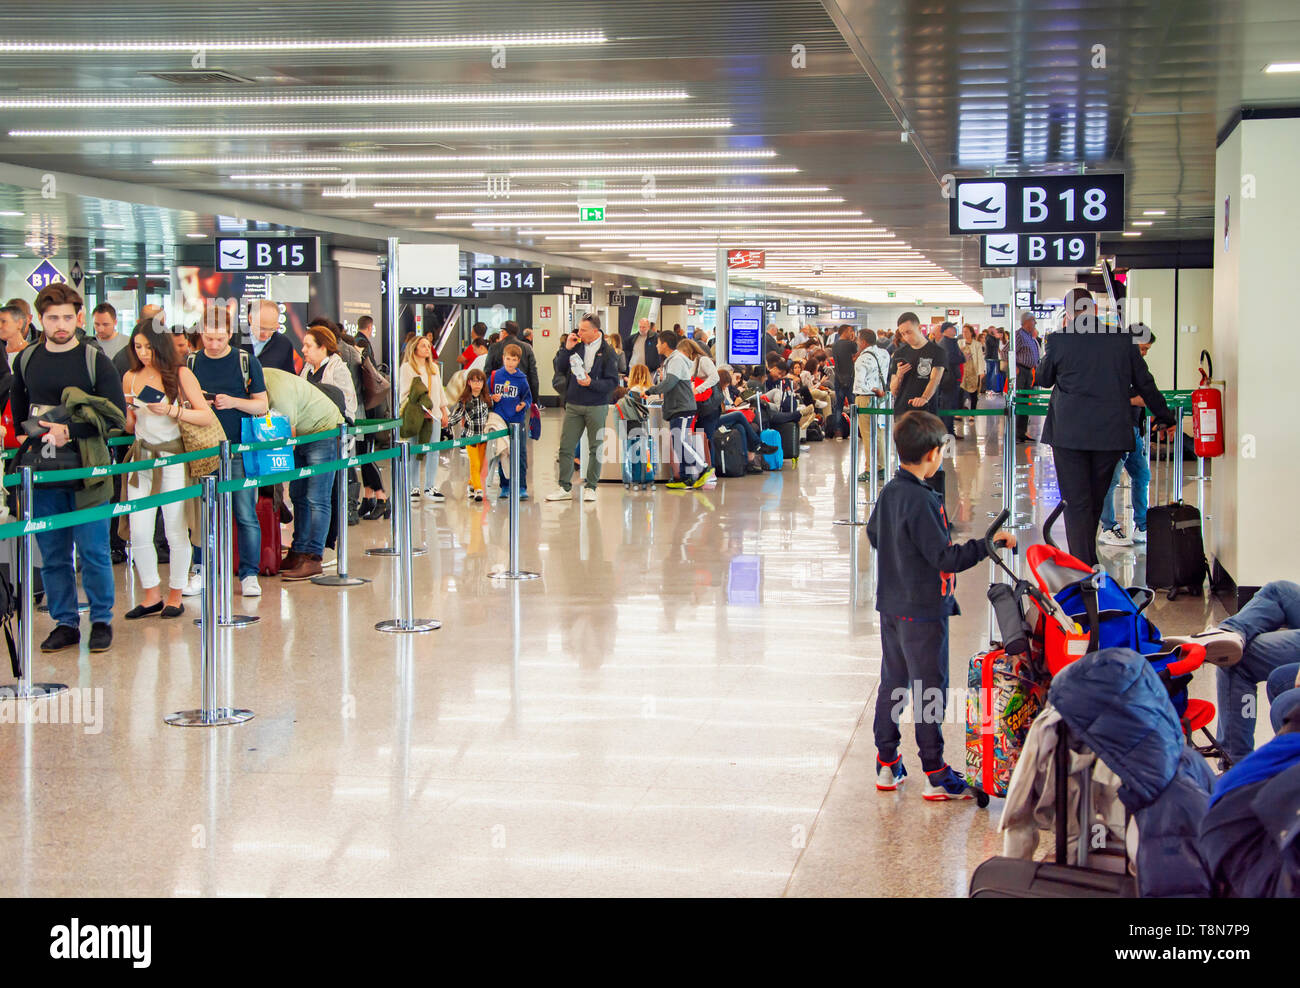 crowd of people waiting in line to check in at an airport. Transport and travel. Travelers and holidays. People waiting Stock Photo